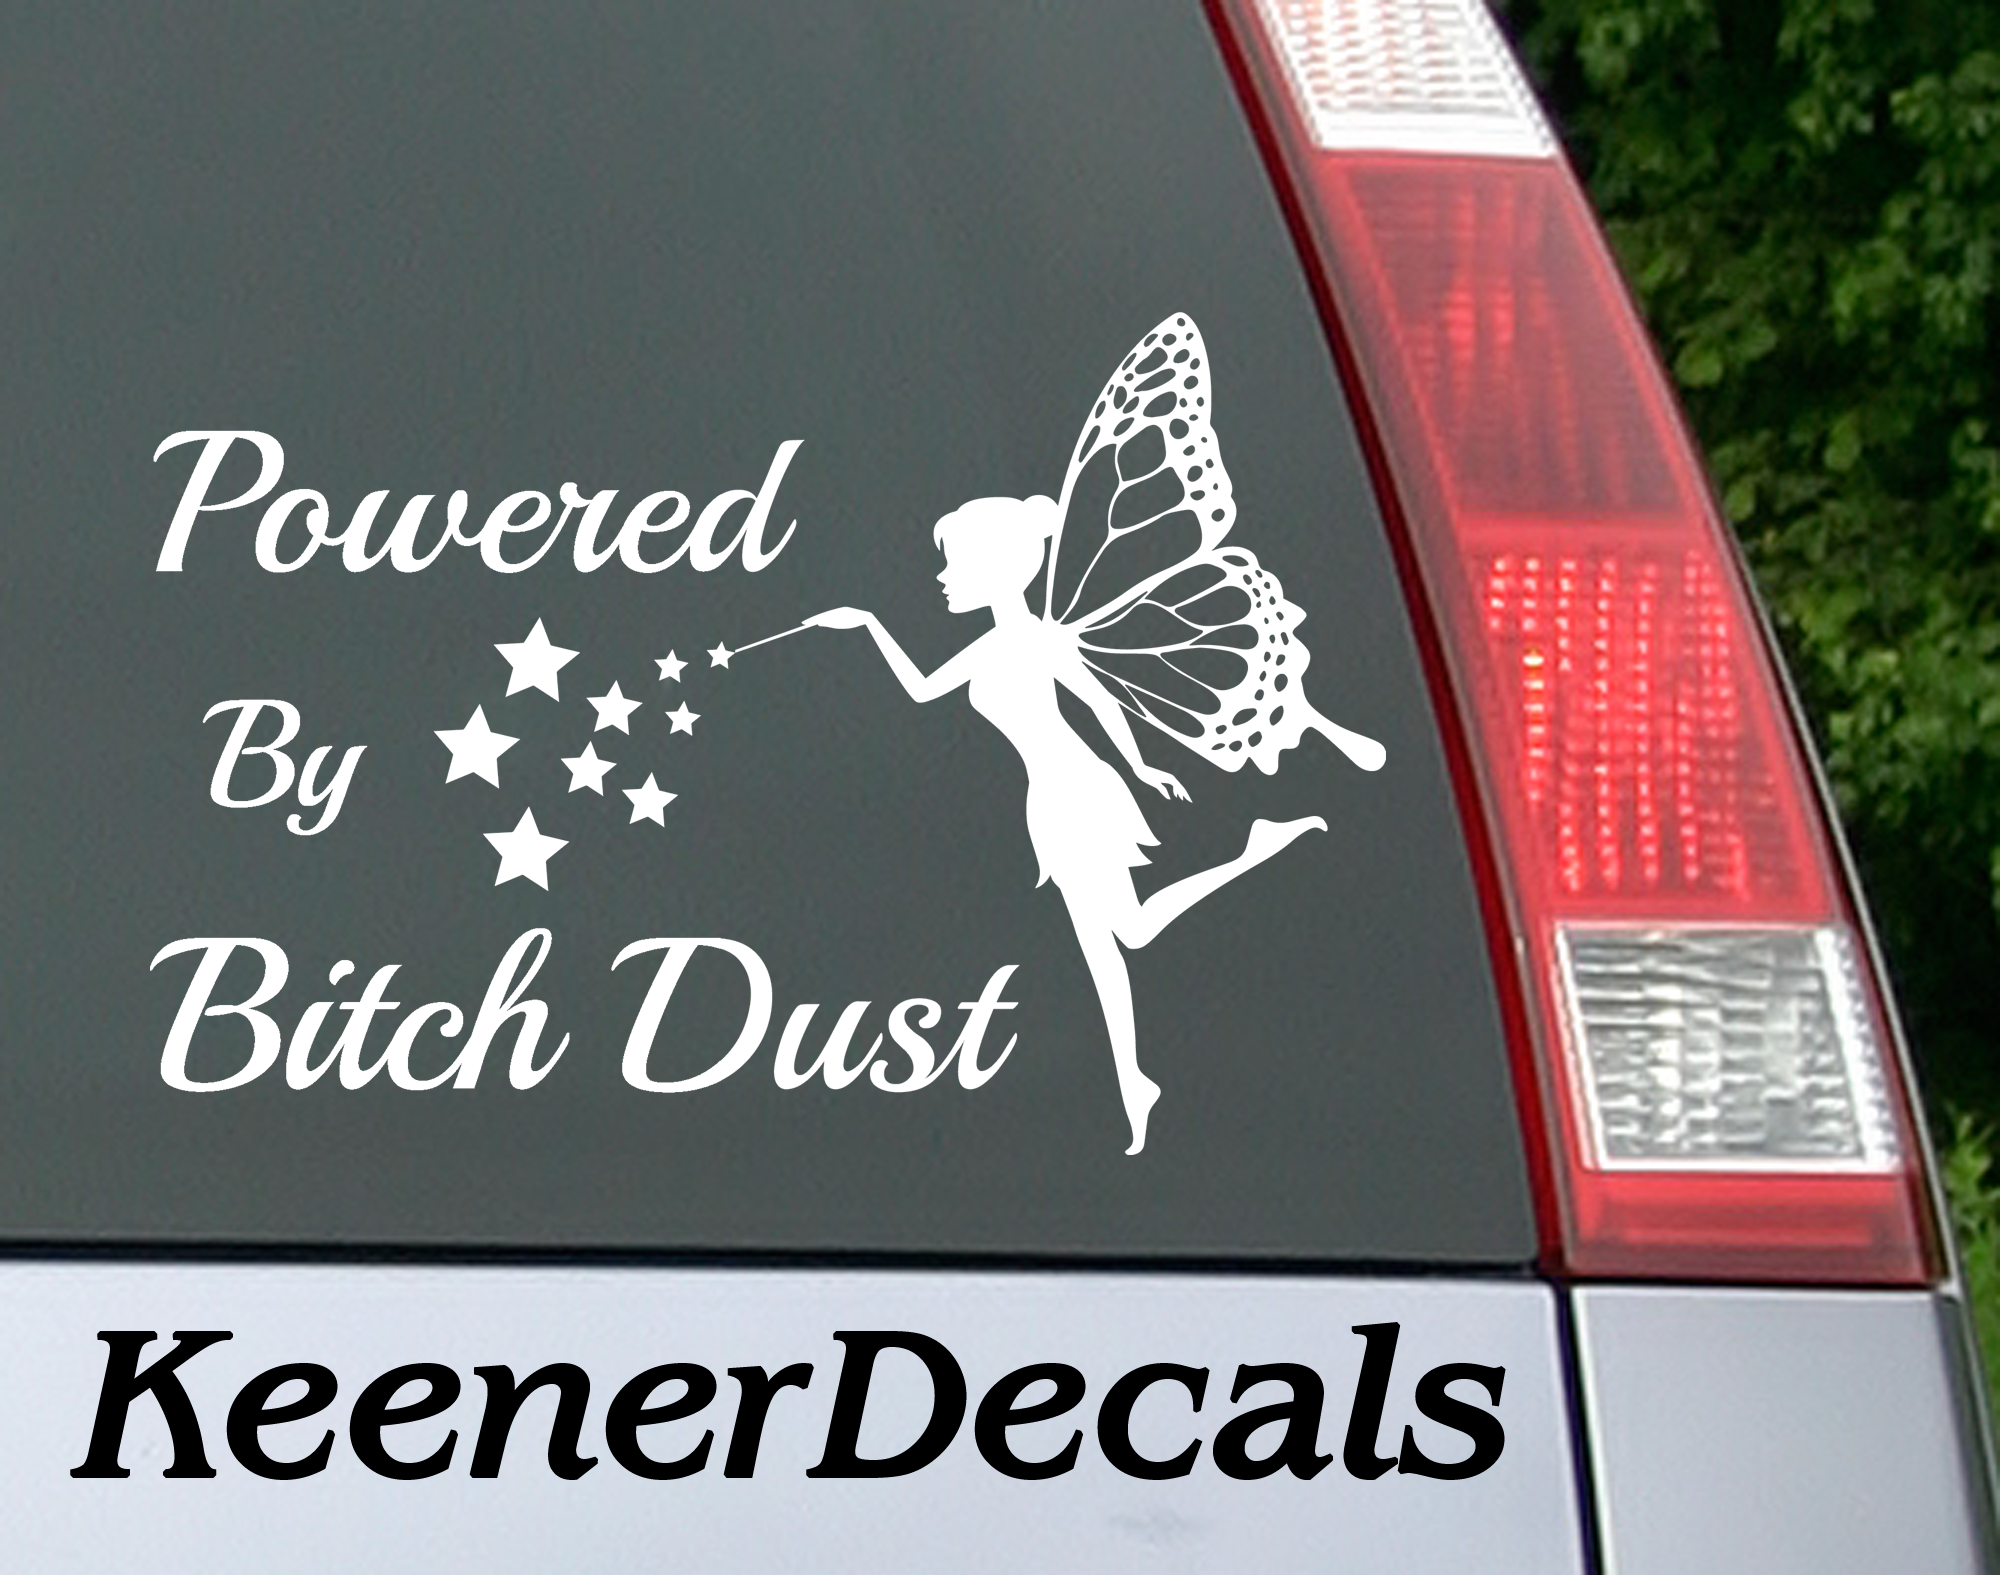 Powered By Bitch Dust Vinyl Car Decal Bumper Sticker. A warning to all. :P  7"W x 4.5"H Funny Car Decal, Car Sticker, Car Vinyl, Bumper Sticker, Vinyl Stickers, Vinyl Sticker. White